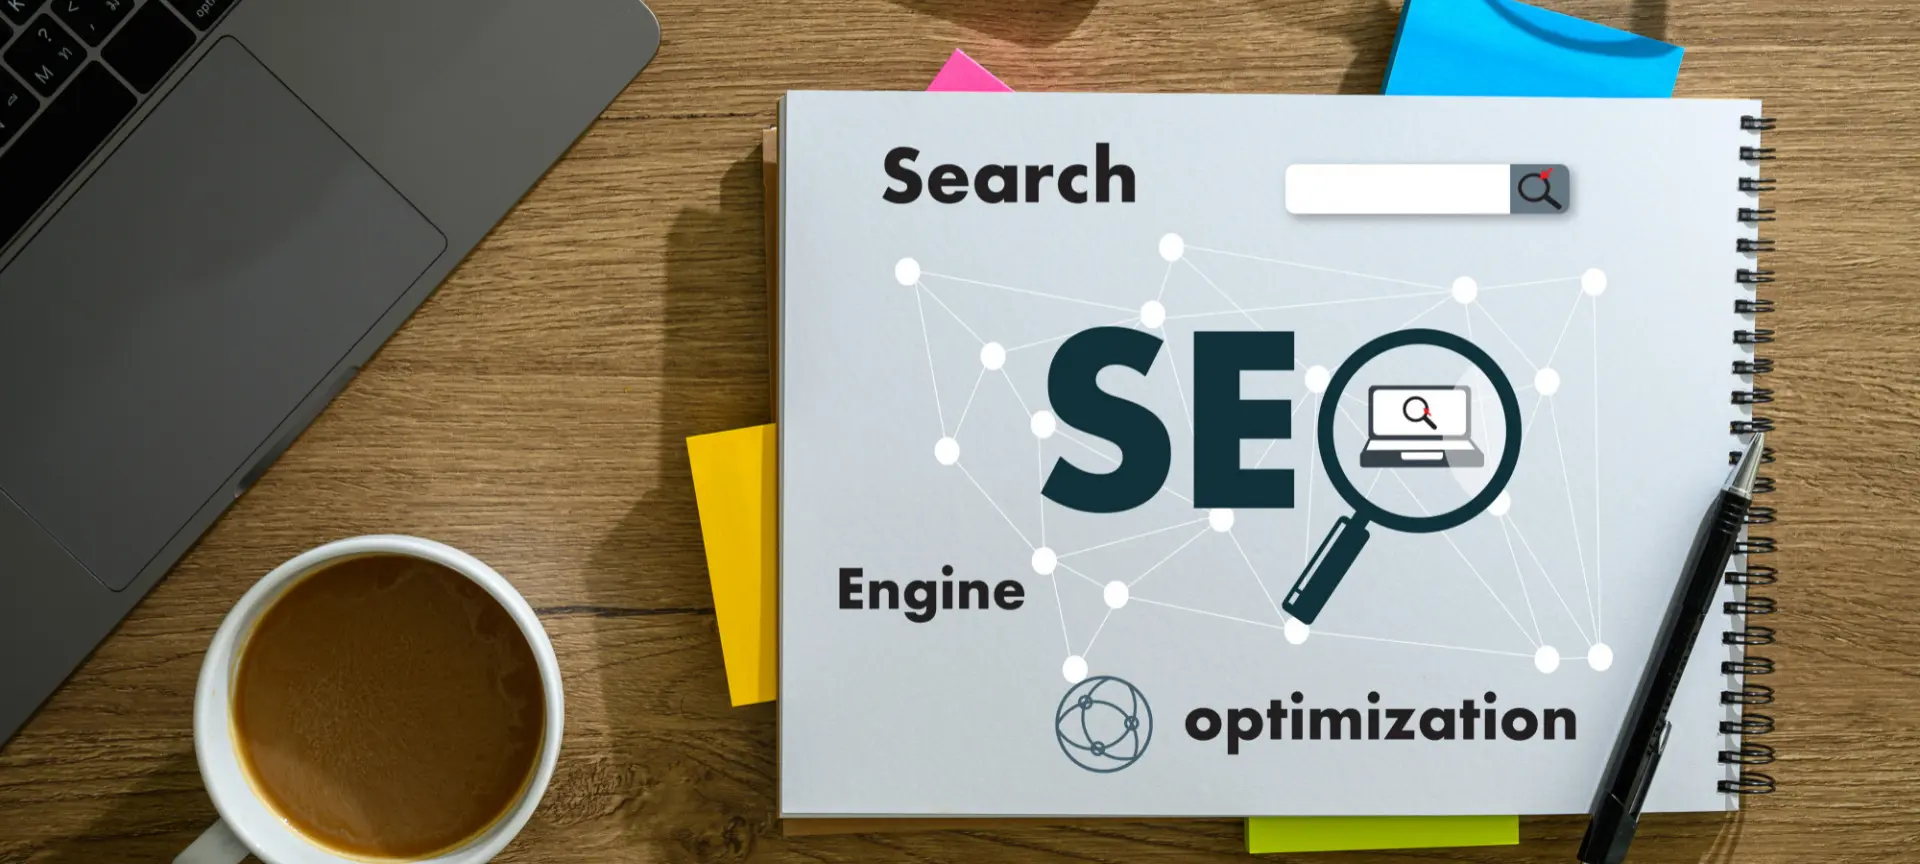 Everything you need to know about SEO